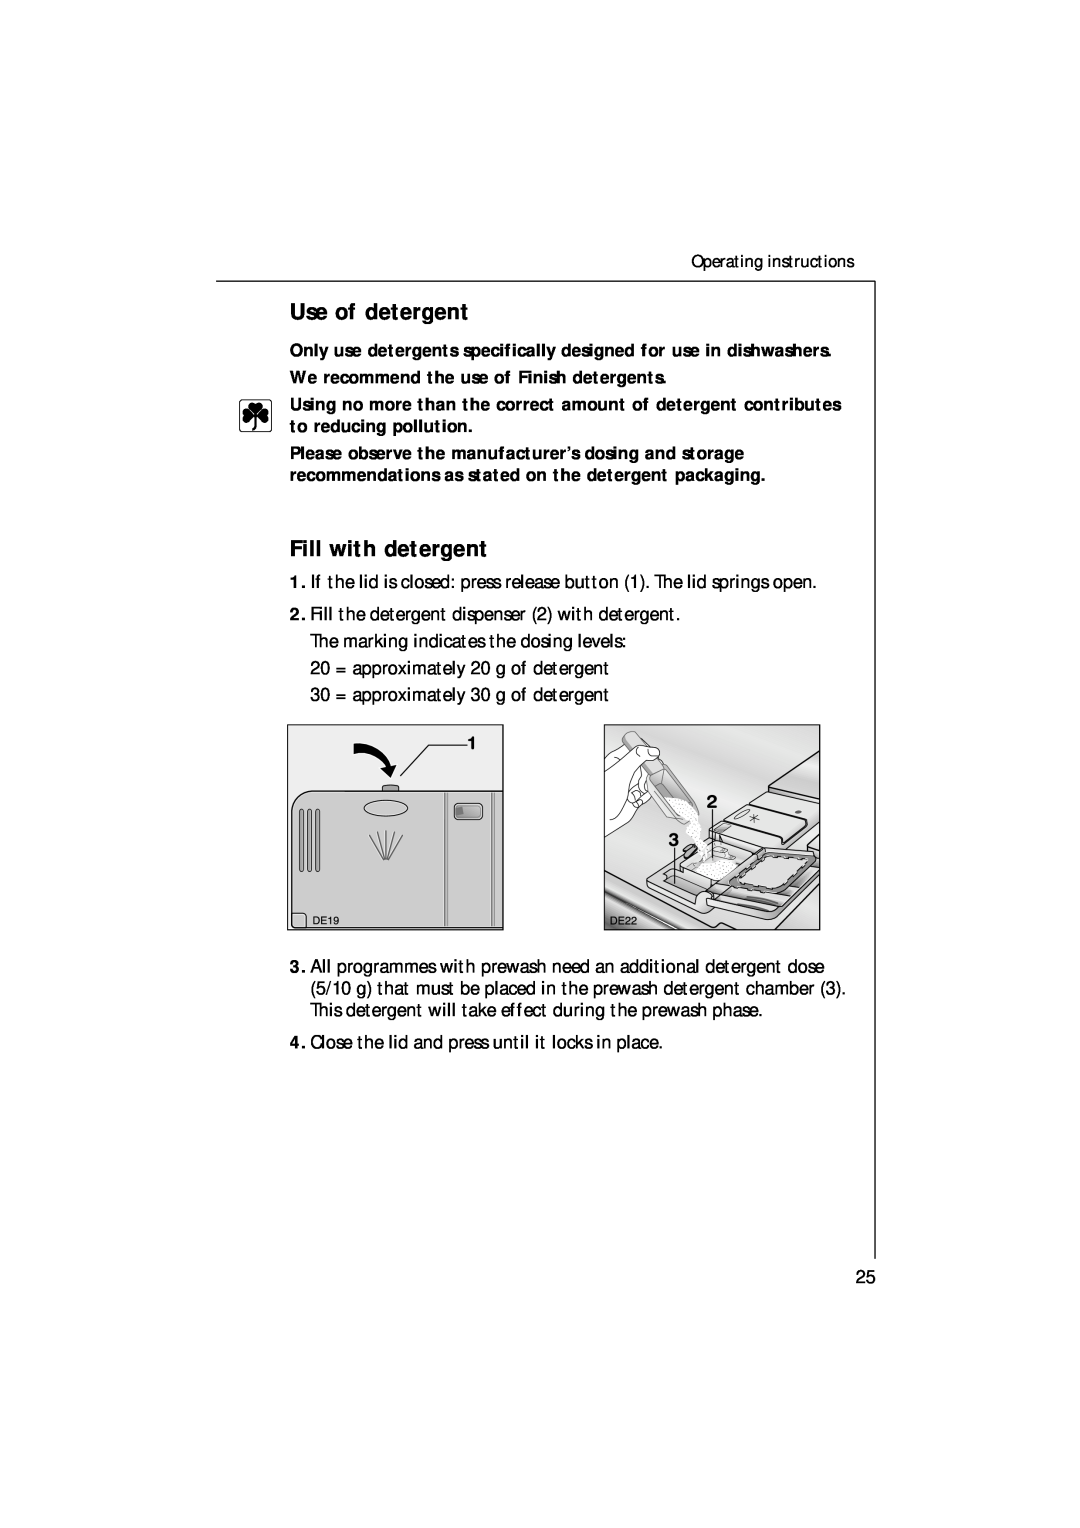 Electrolux 85480 VI manual Use of detergent, Fill with detergent, 20 = approximately 20 g of detergent 